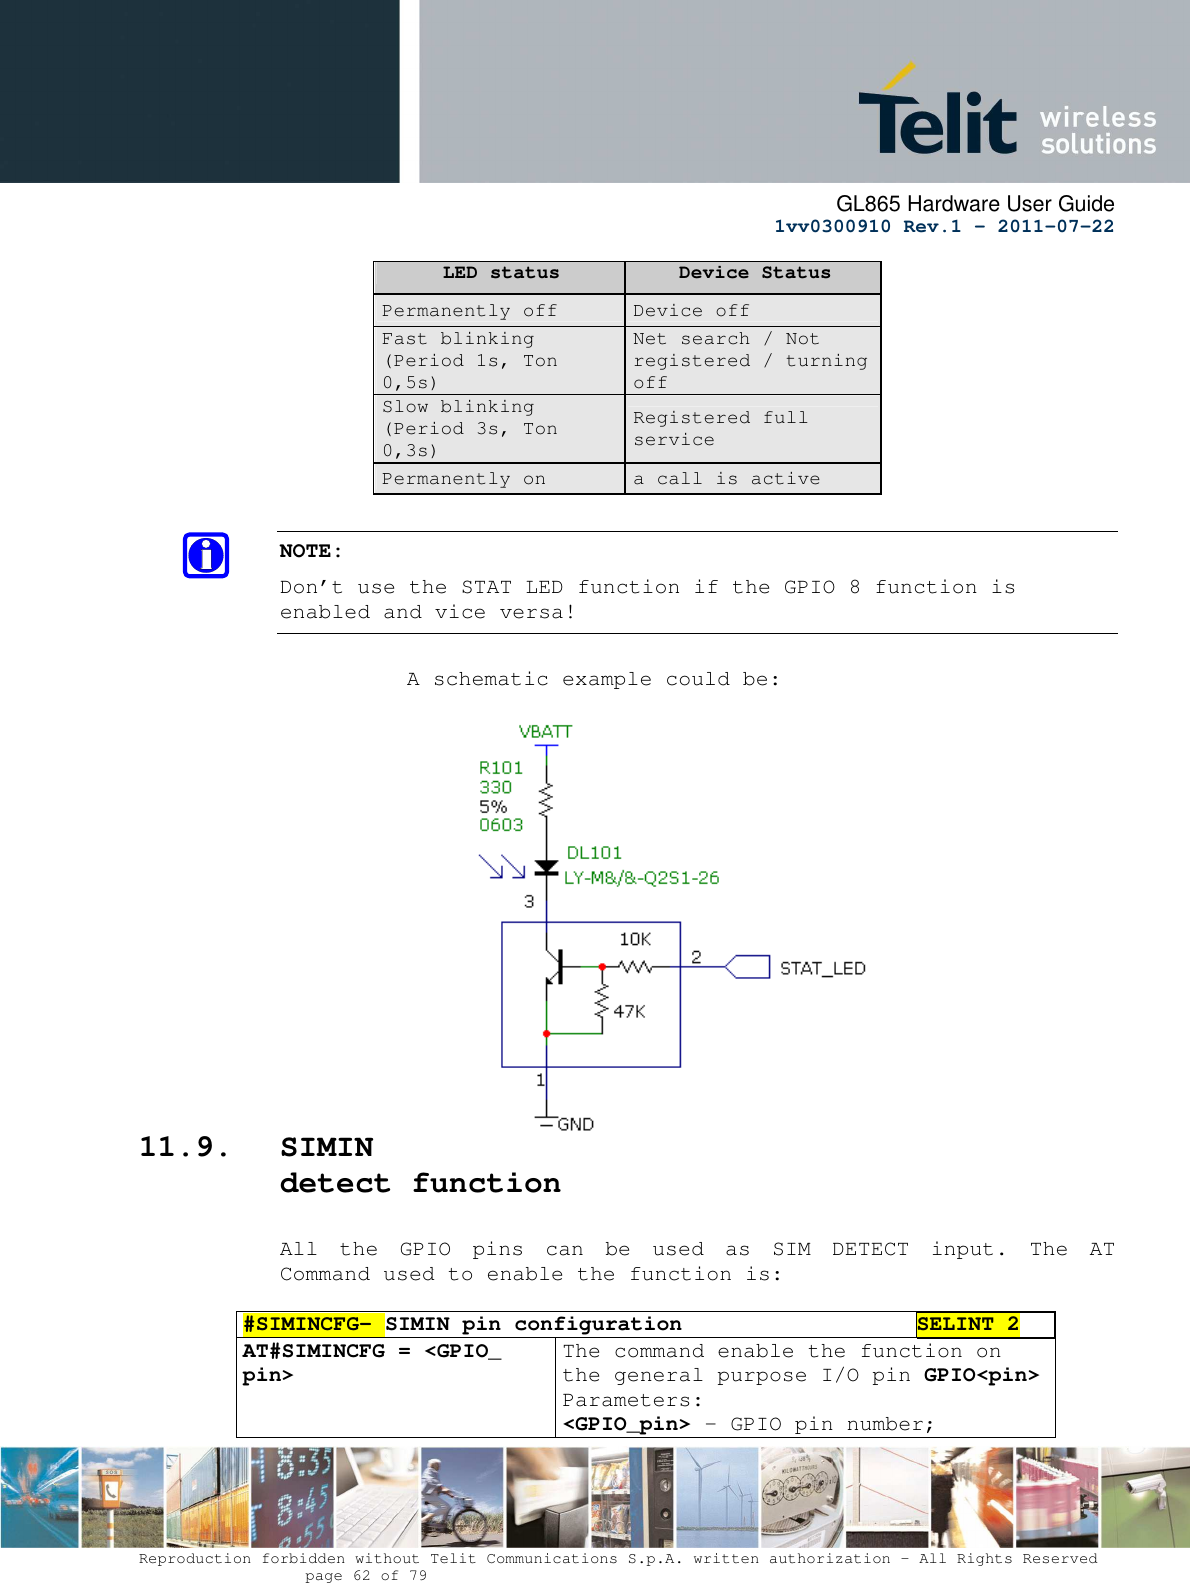      GL865 Hardware User Guide     1vv0300910 Rev.1 – 2011-07-22       Reproduction forbidden without Telit Communications S.p.A. written authorization - All Rights Reserved    page 62 of 79  LED status  Device Status Permanently off  Device off Fast blinking (Period 1s, Ton 0,5s) Net search / Not registered / turning off Slow blinking (Period 3s, Ton 0,3s) Registered full service Permanently on  a call is active  NOTE: Don’t use the STAT LED function if the GPIO 8 function is enabled and vice versa!            A schematic example could be:                  11.9. SIMIN detect function  All  the  GPIO  pins  can  be  used  as  SIM  DETECT  input.  The  AT Command used to enable the function is:   #SIMINCFG– SIMIN pin configuration SELINT 2 AT#SIMINCFG = &lt;GPIO_ pin&gt;  The command enable the function on the general purpose I/O pin GPIO&lt;pin&gt;  Parameters: &lt;GPIO_pin&gt; - GPIO pin number; 